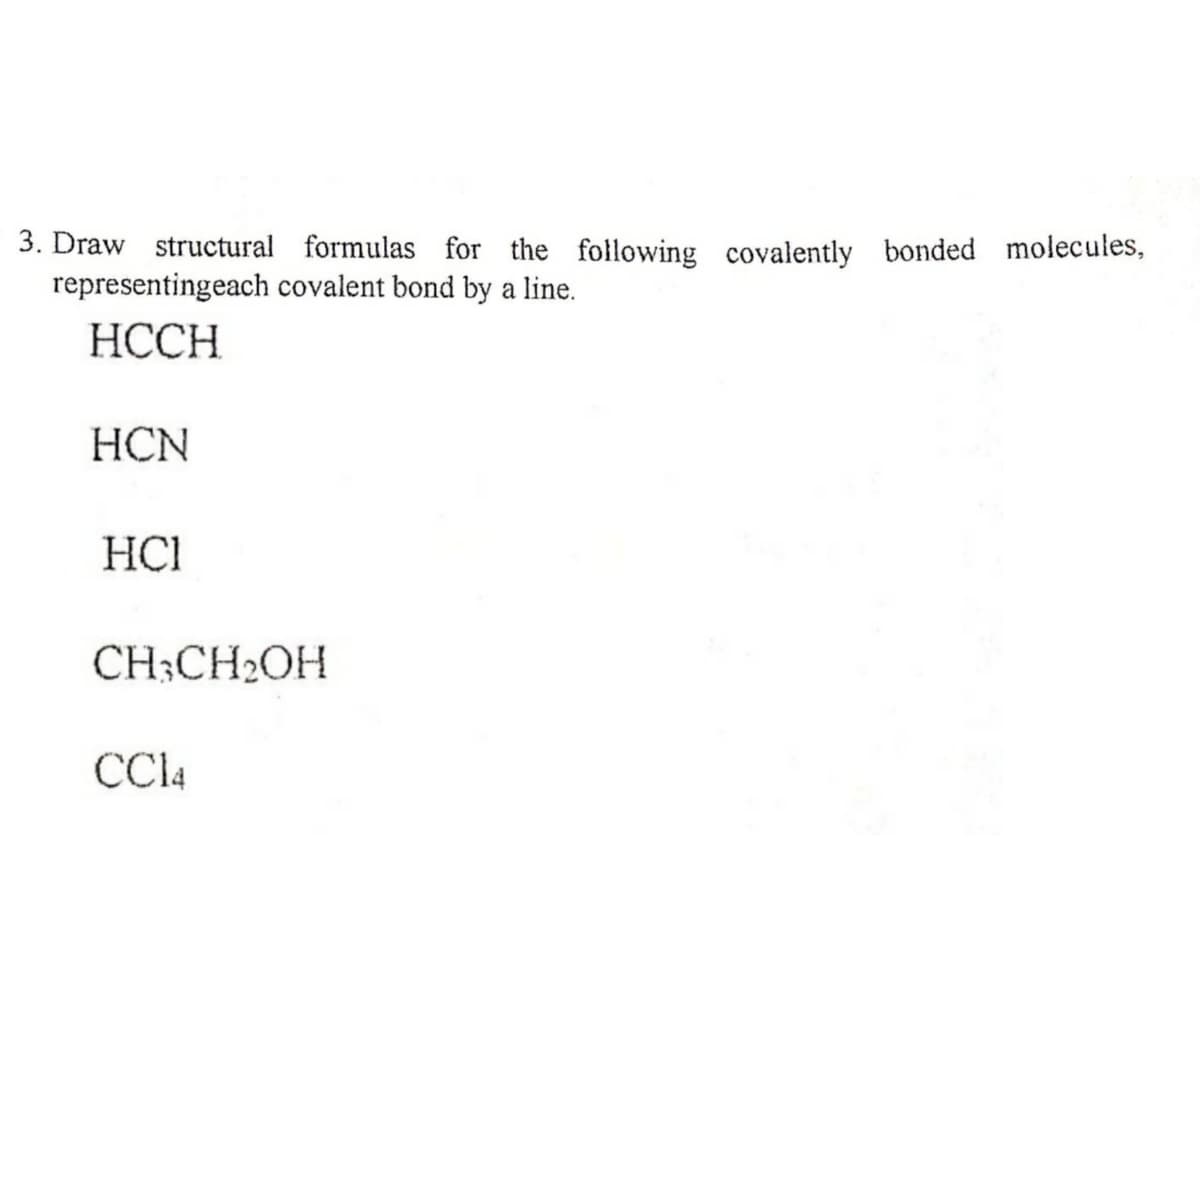 3. Draw structural formulas for the following covalently bonded molecules,
representingeach covalent bond by a line.
НССH
HCN
HC1
CH;CH2OH
CCI4
